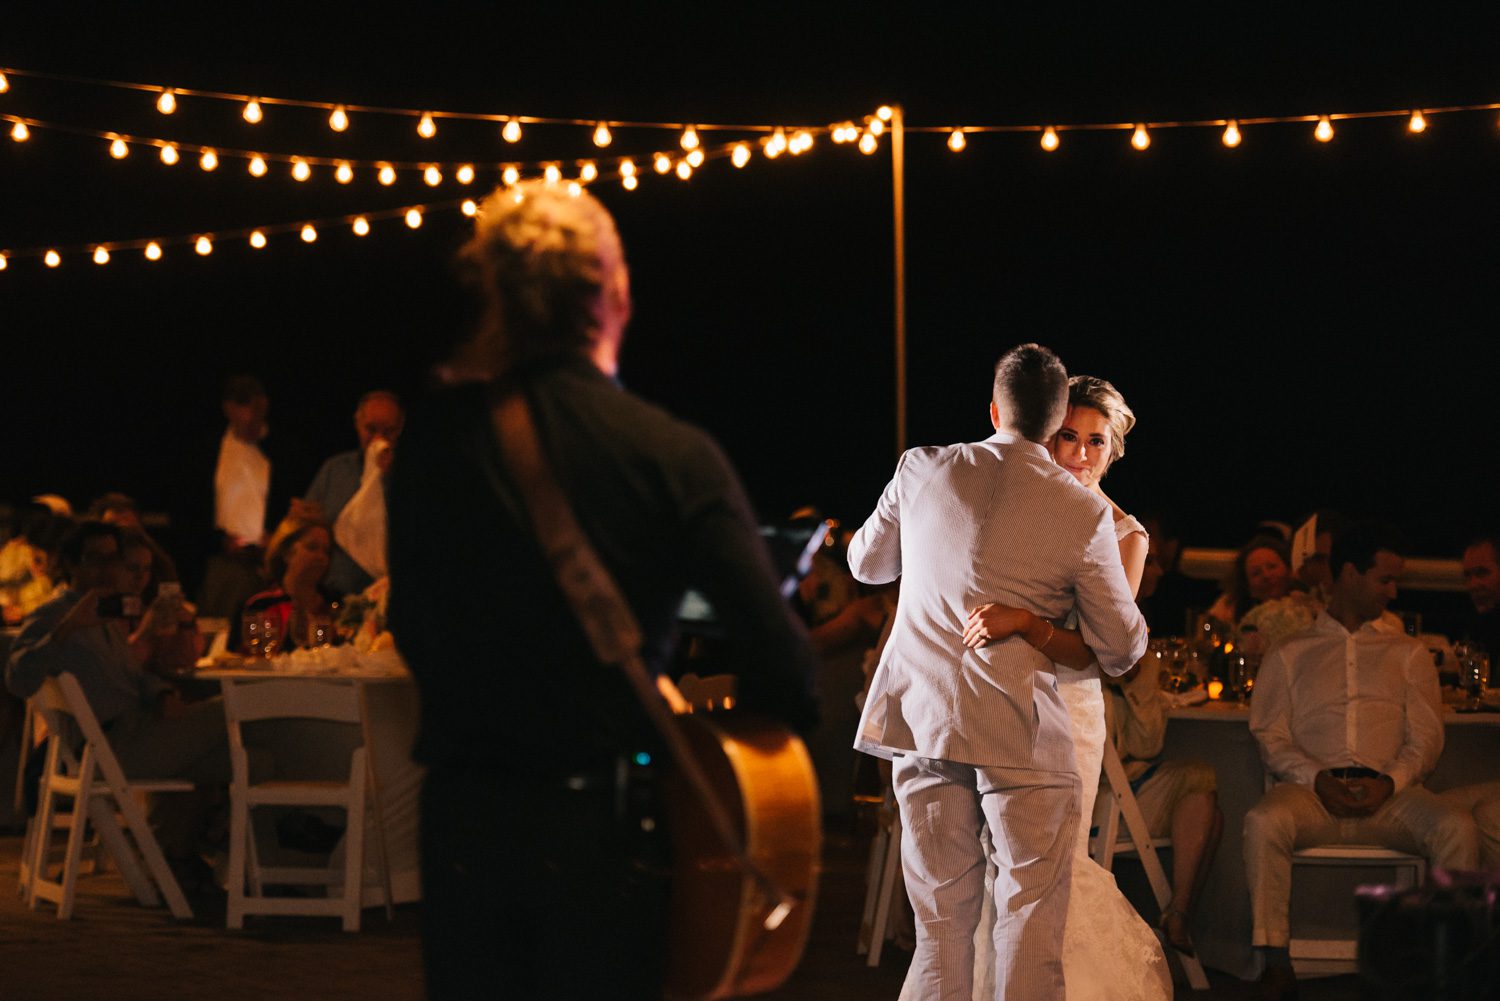 A bride and groom sharing their first dance at a romantic sunset key wedding.